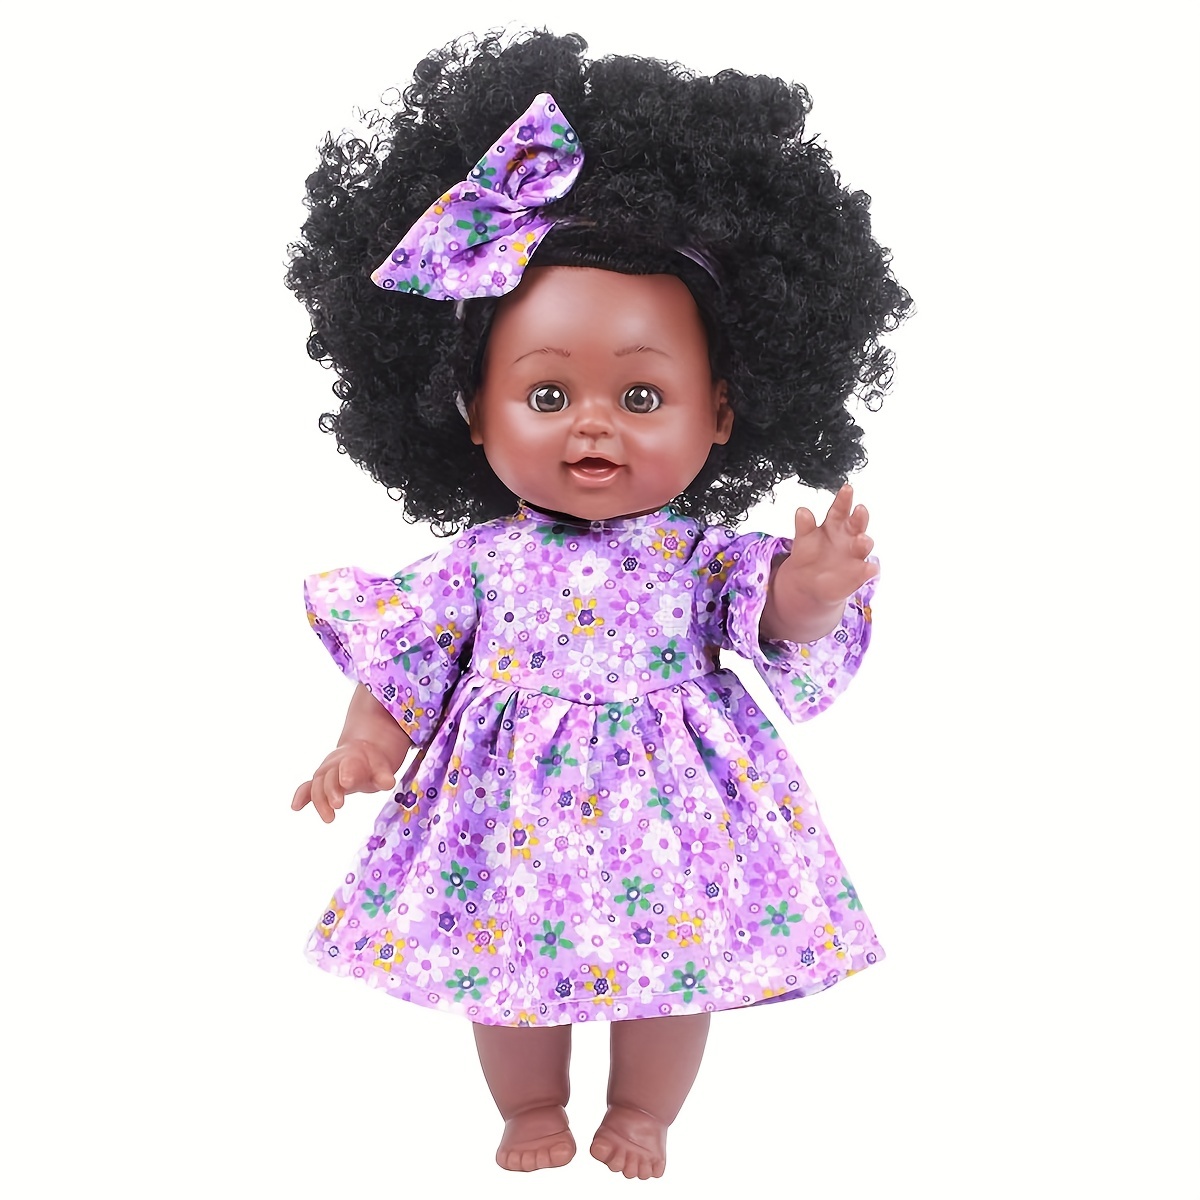 African American BABY BORN INTERACTIVE solid vinyl jointed Baby Doll by ZAPF